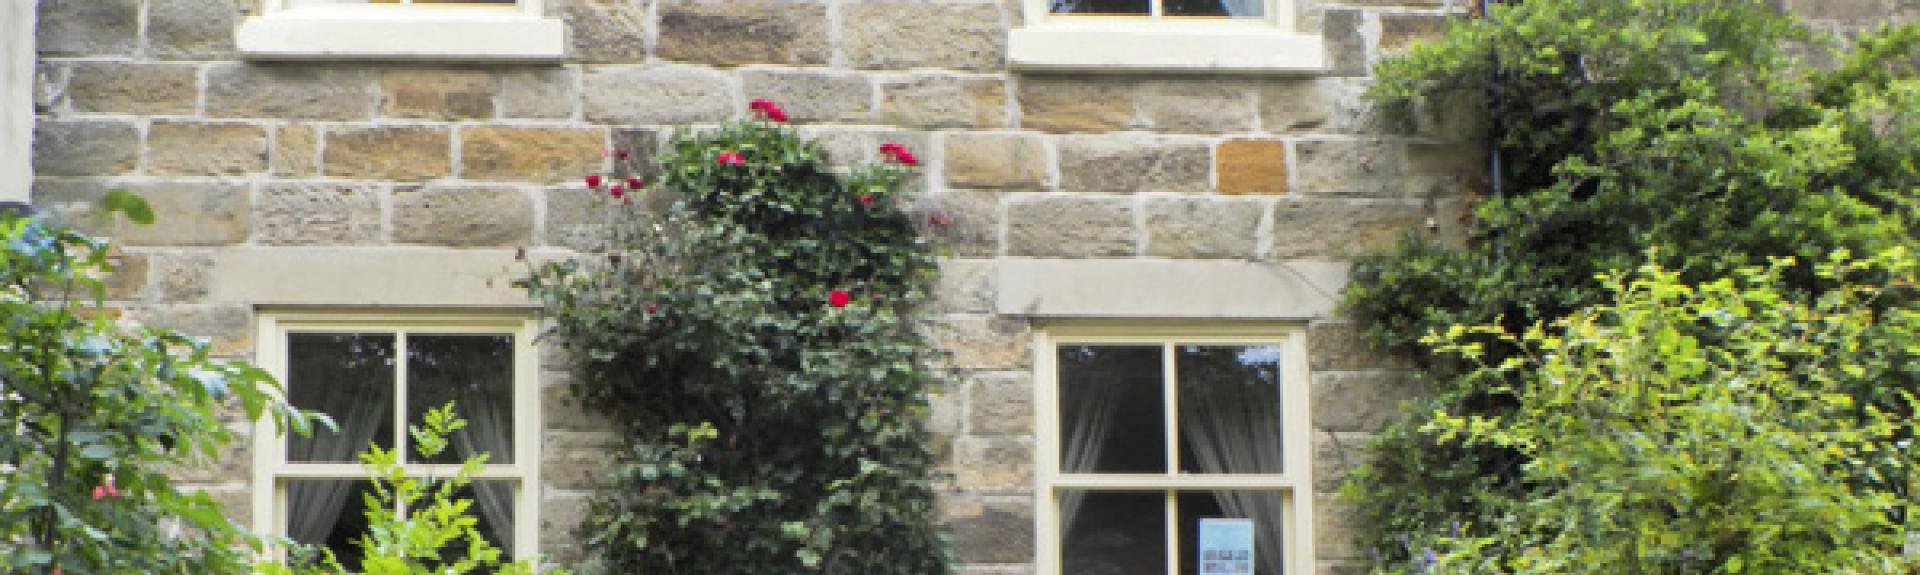 A semi-dtached, stone-buit North Yorkshire holiday cottage sits behind afront garden with shrubs and roses.